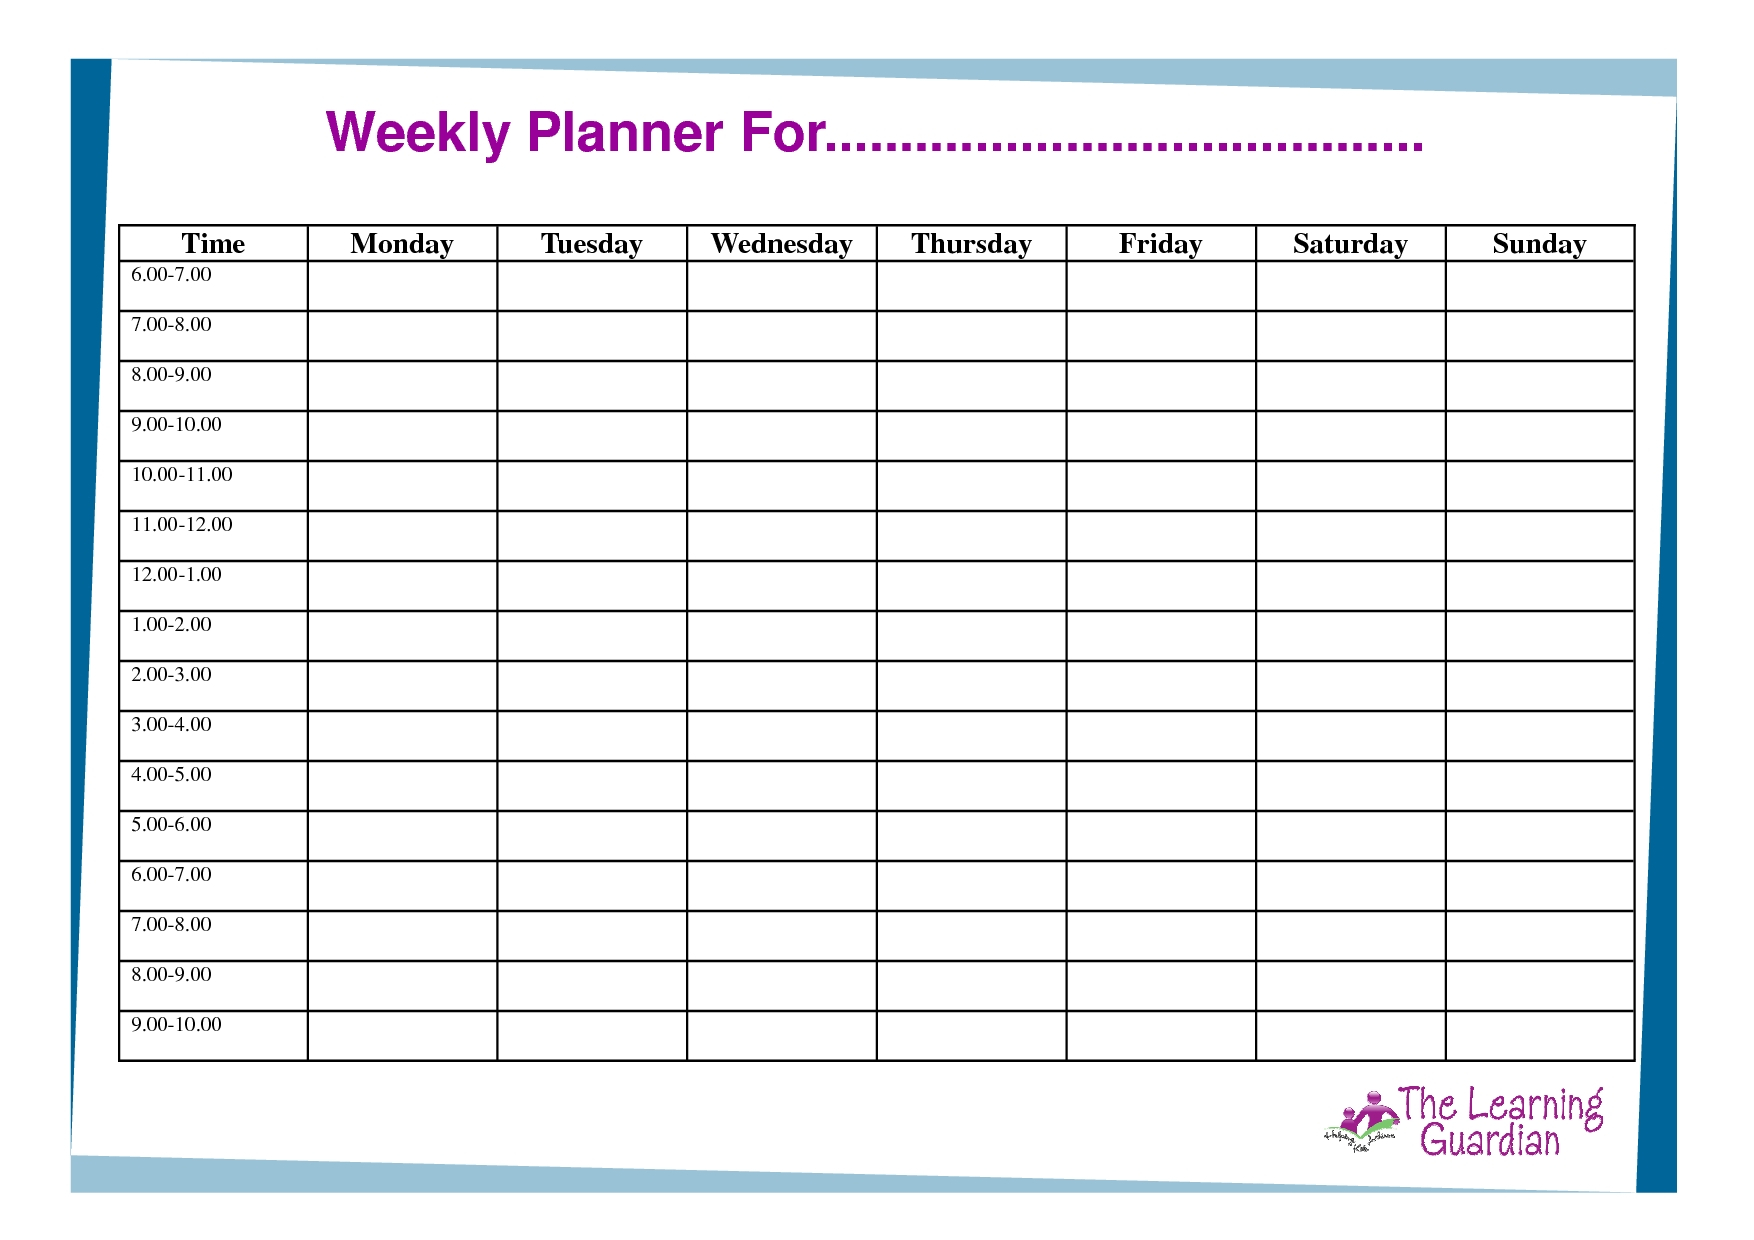 Monday Through Friday Schedule Template | Calendar  Free Monday Through Friday Calendar Templates